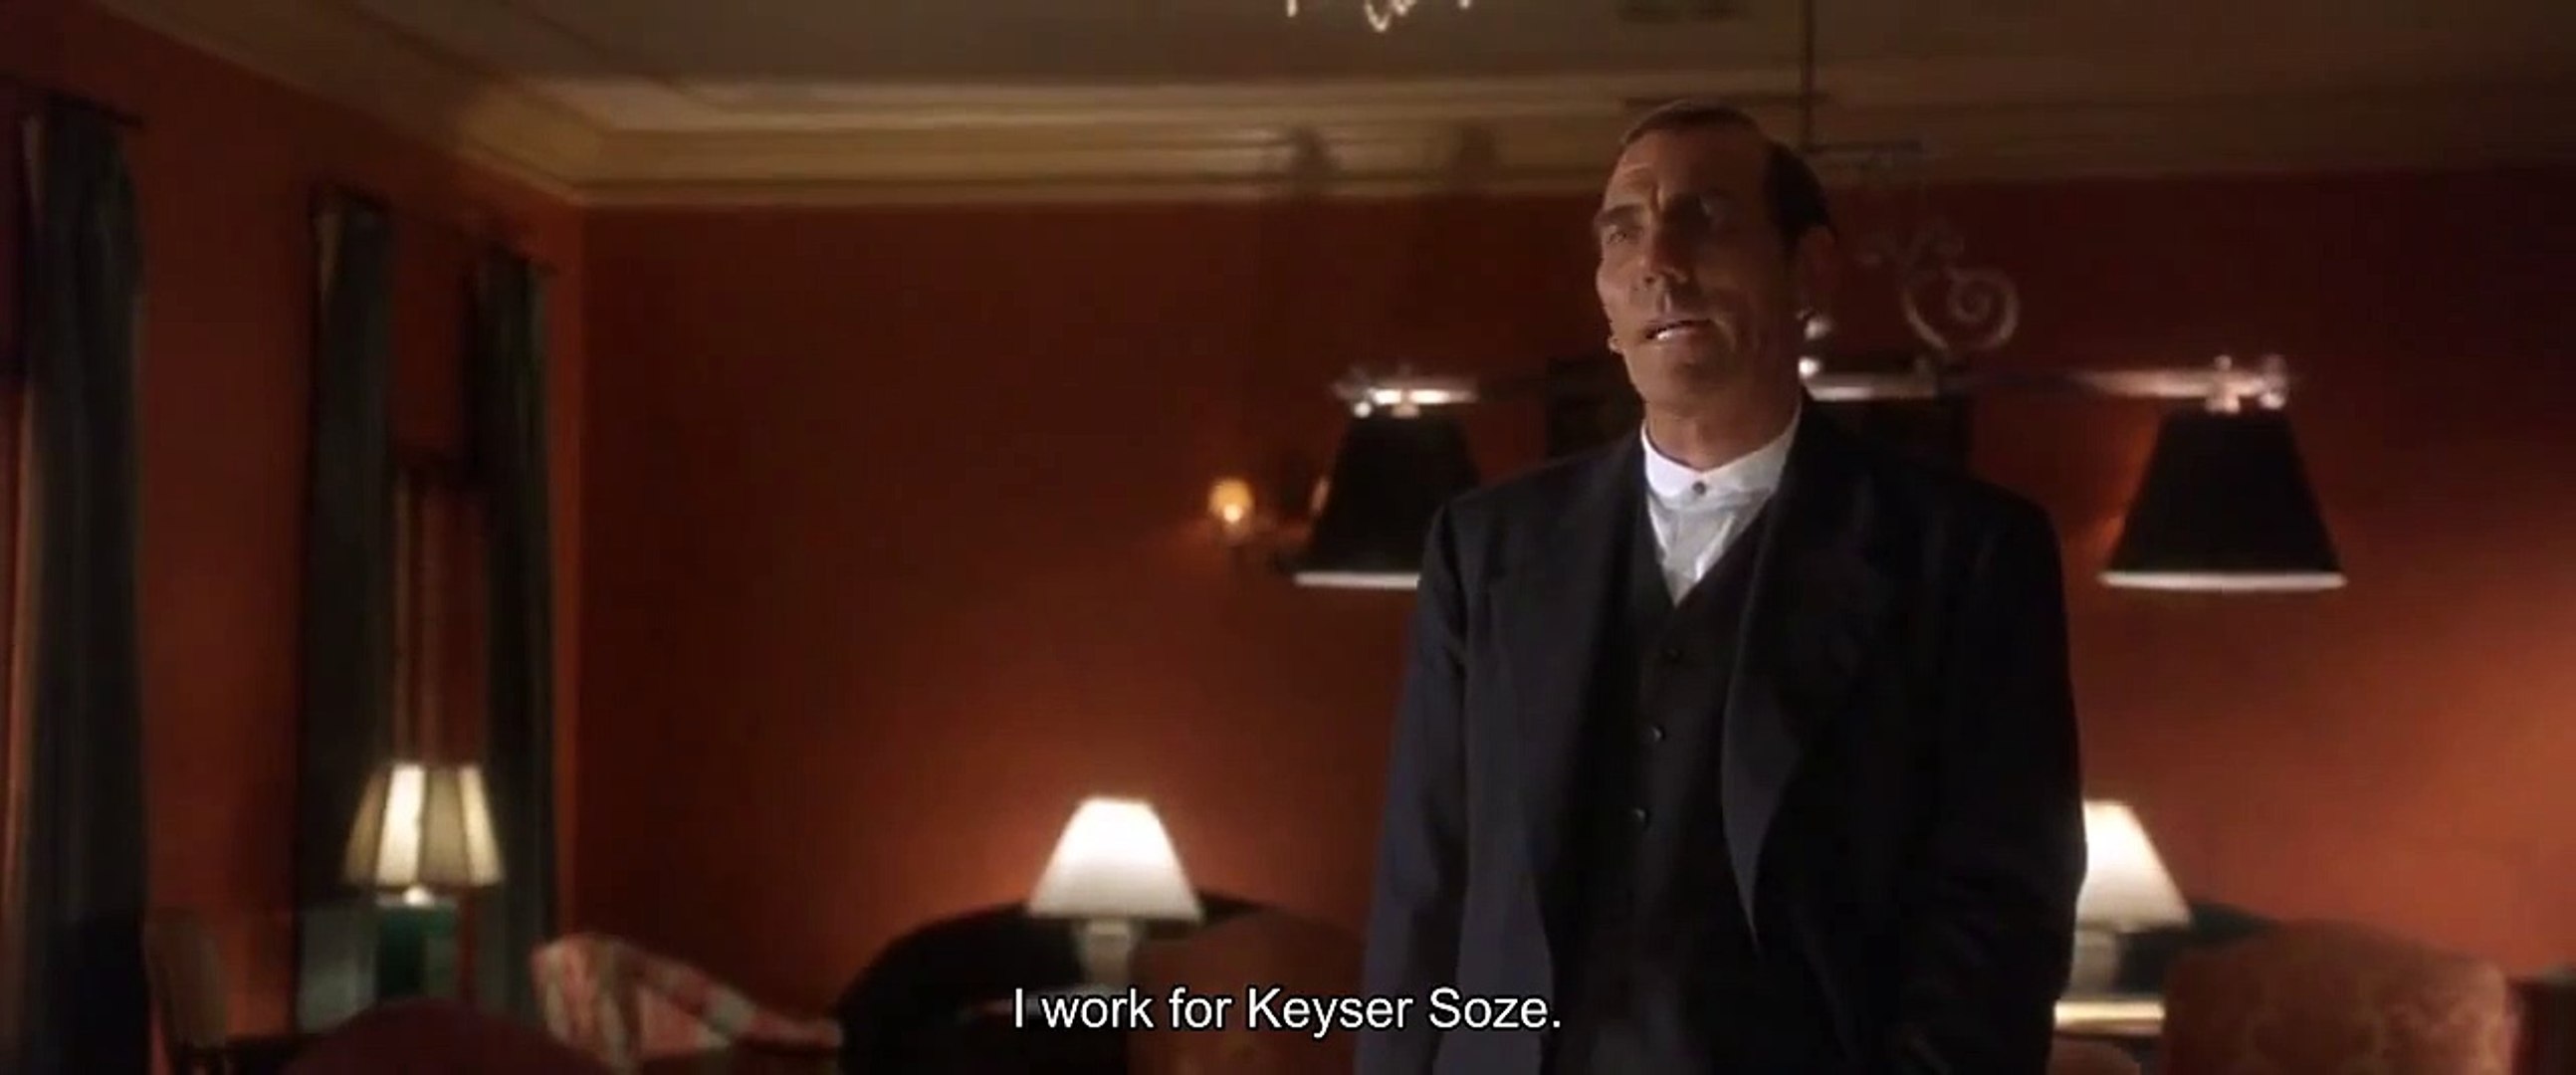 At the beginning of The Usual Suspects (1995), Keyser Söze is